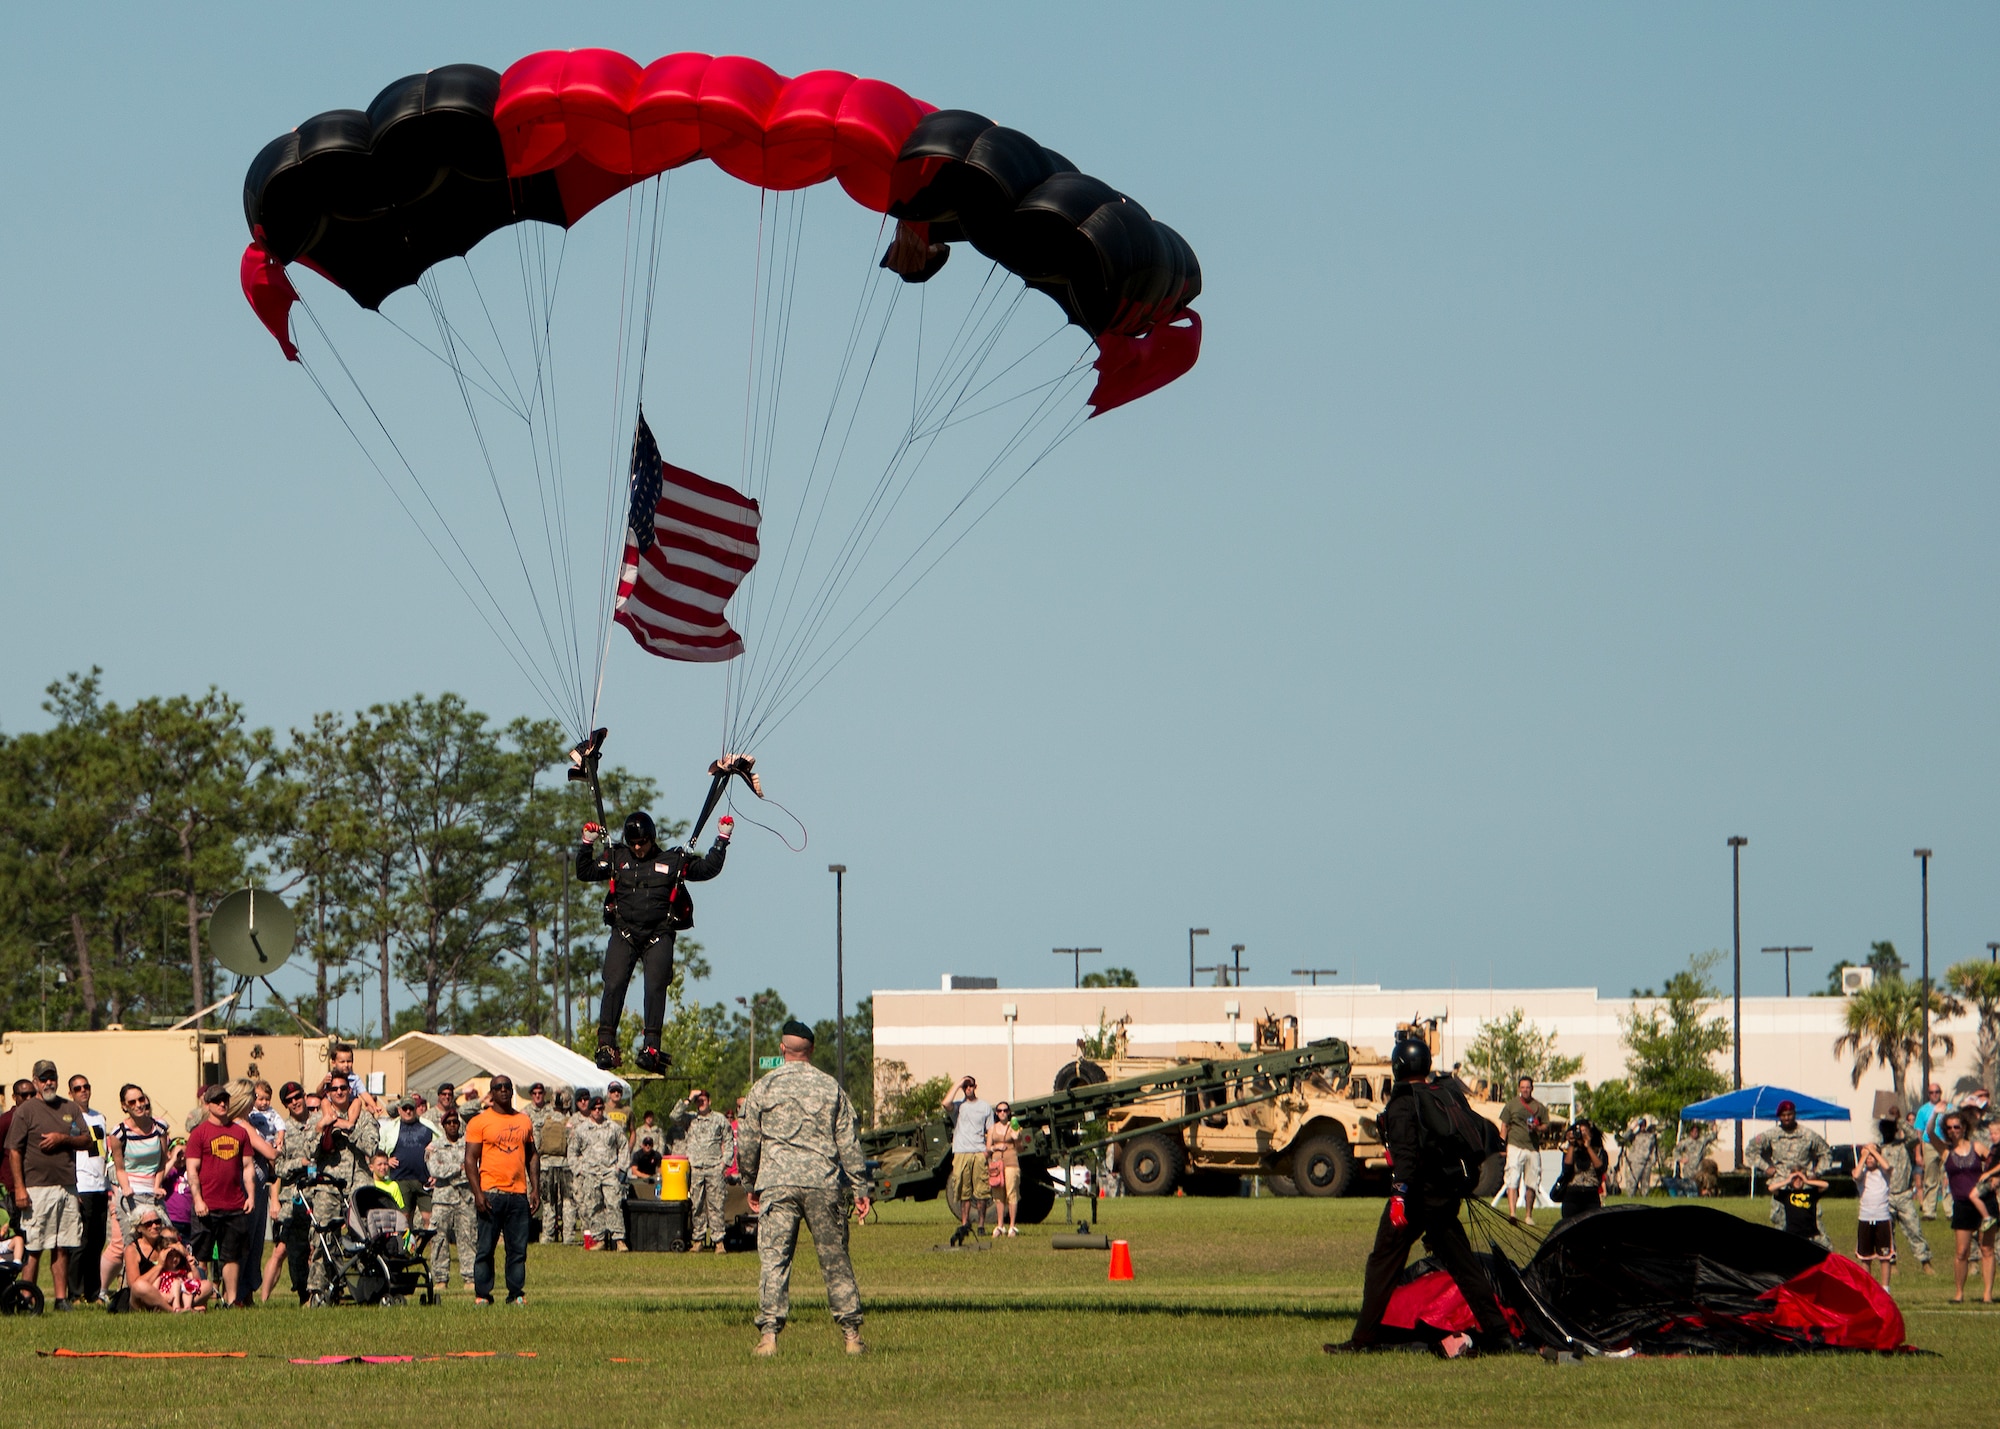 Members of the U. S. Army Special Operations Command’s Black Daggers Parachute Demonstration Team drop onto Eglin Air Force Base during the 7th Special Forces Group (Airborne) Red Empire Week Community Day May 5.  A Duke Field C-145 flew to serve as the team’s free-fall jump platform.  (U.S. Air Force photo/Tech. Sgt. Jasmin Taylor)

